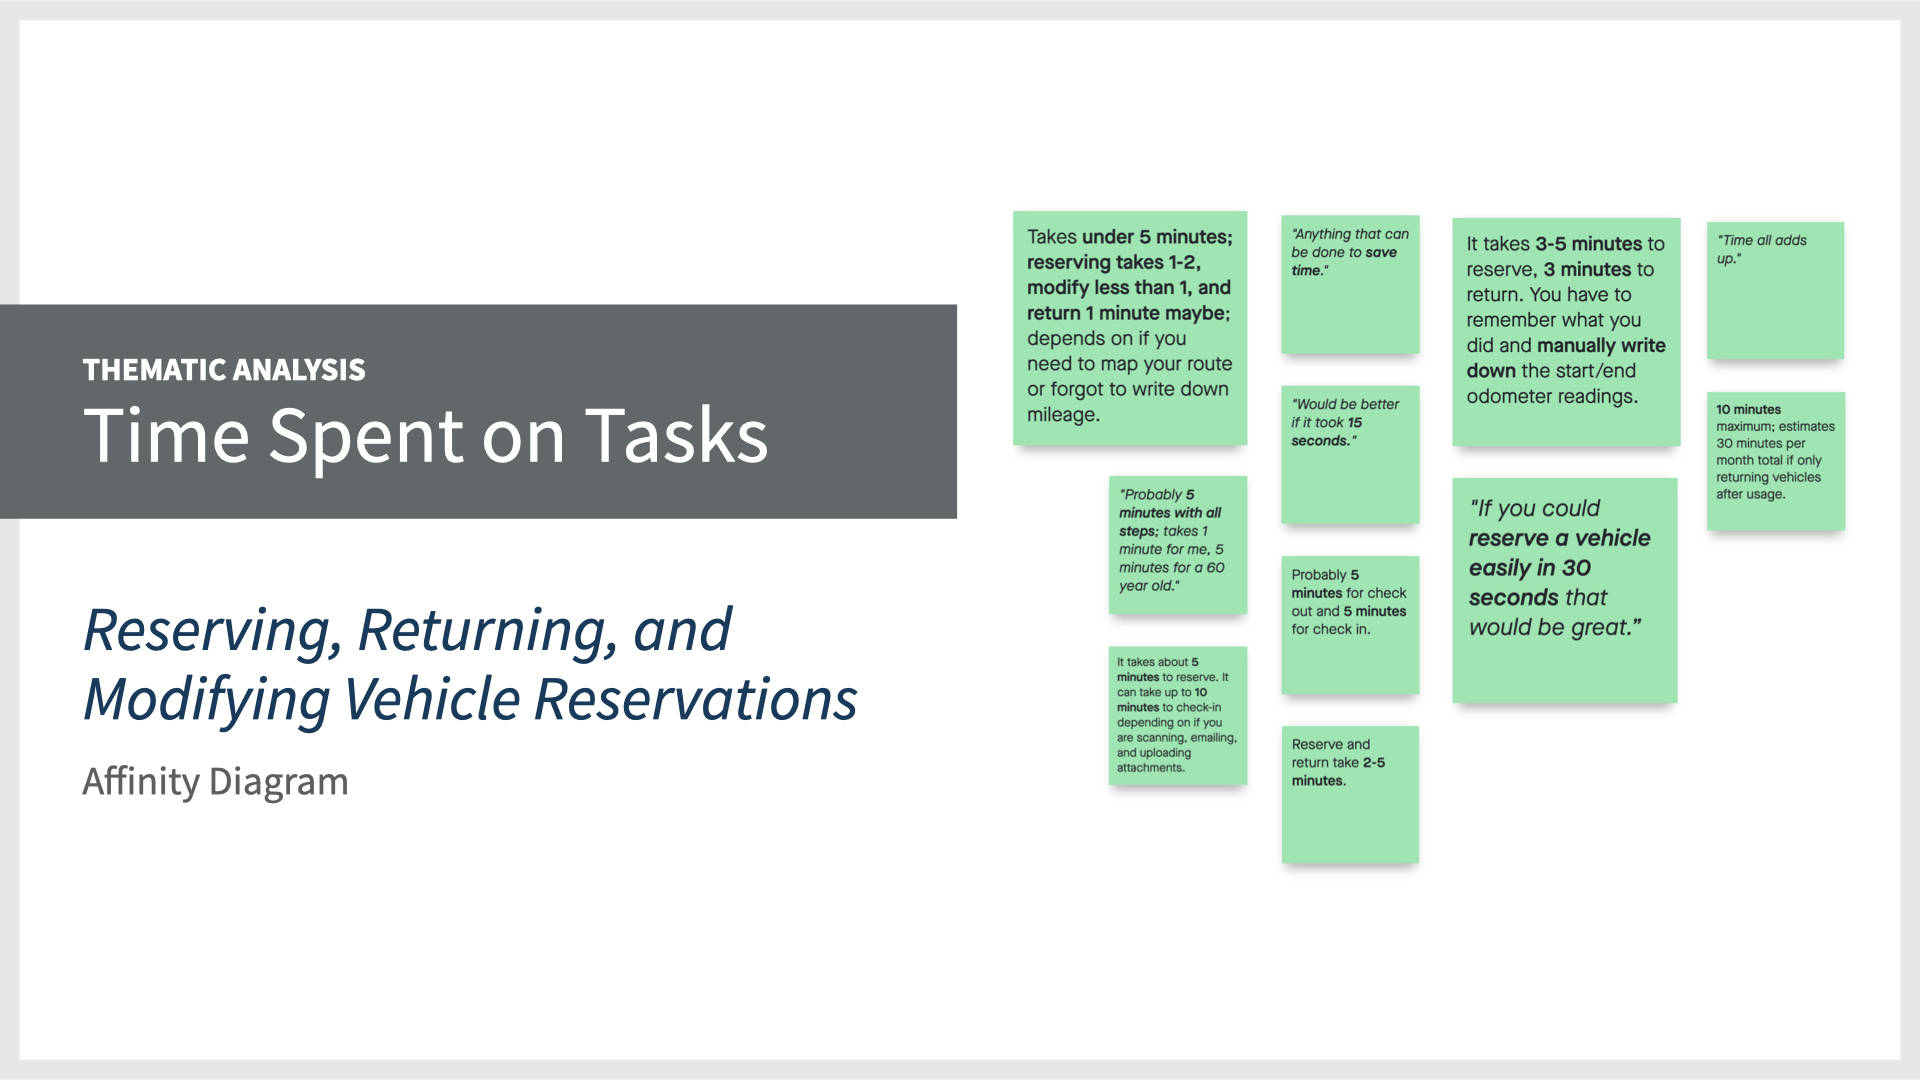 Thematic Analysis: Time Spent on Tasks